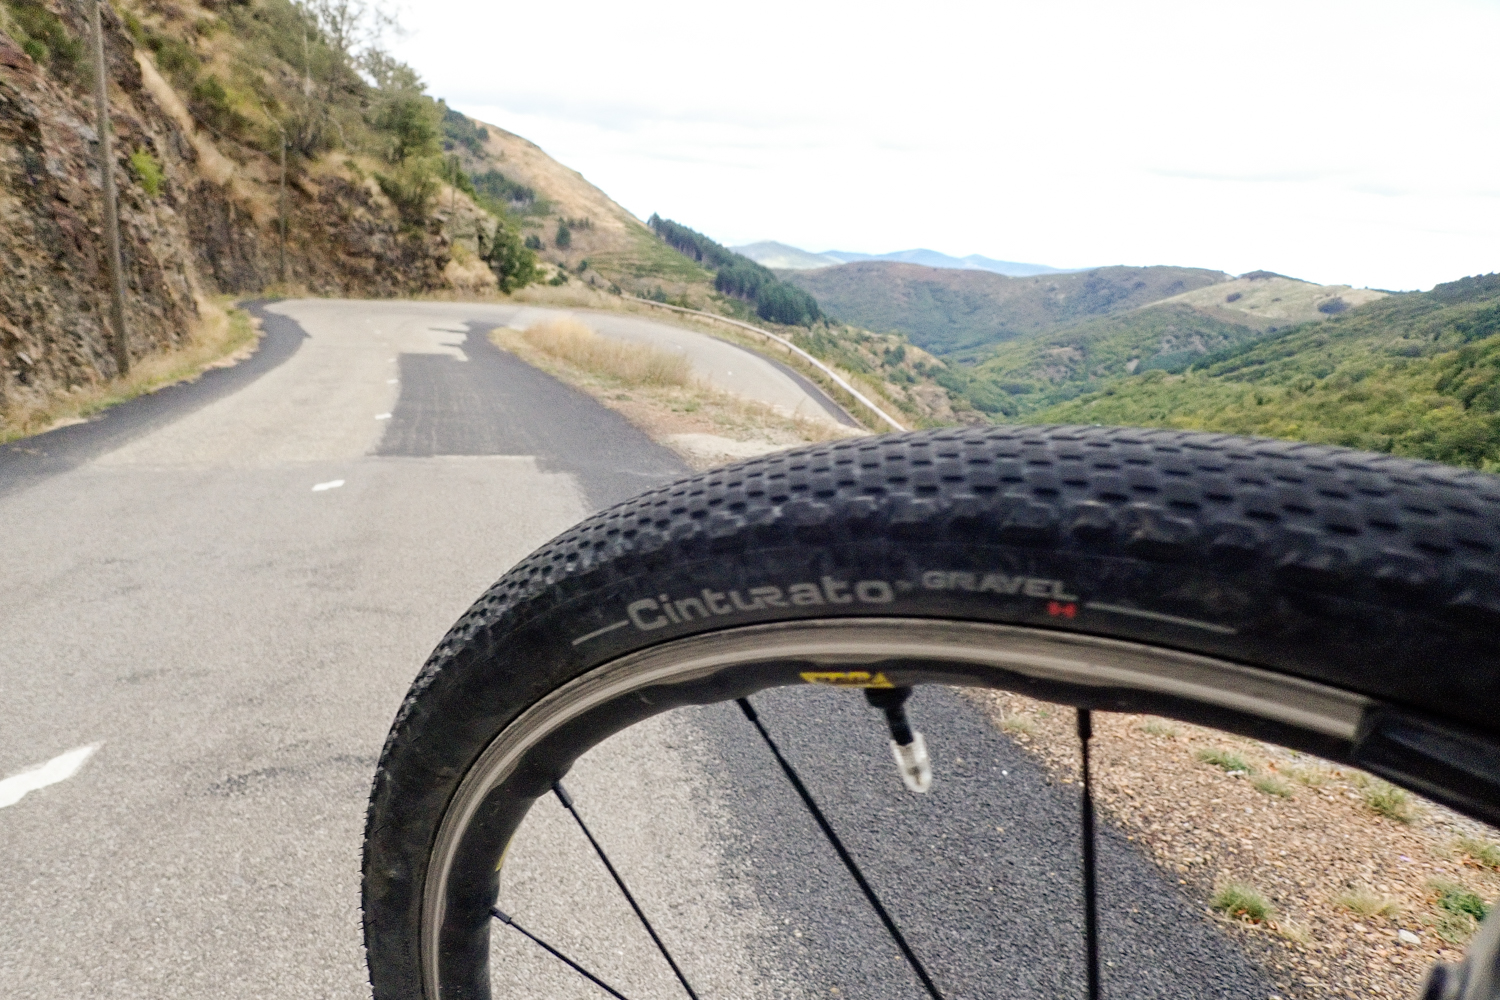 Pirelli Cinturato Gravel H Snaky road tyre tire cycling